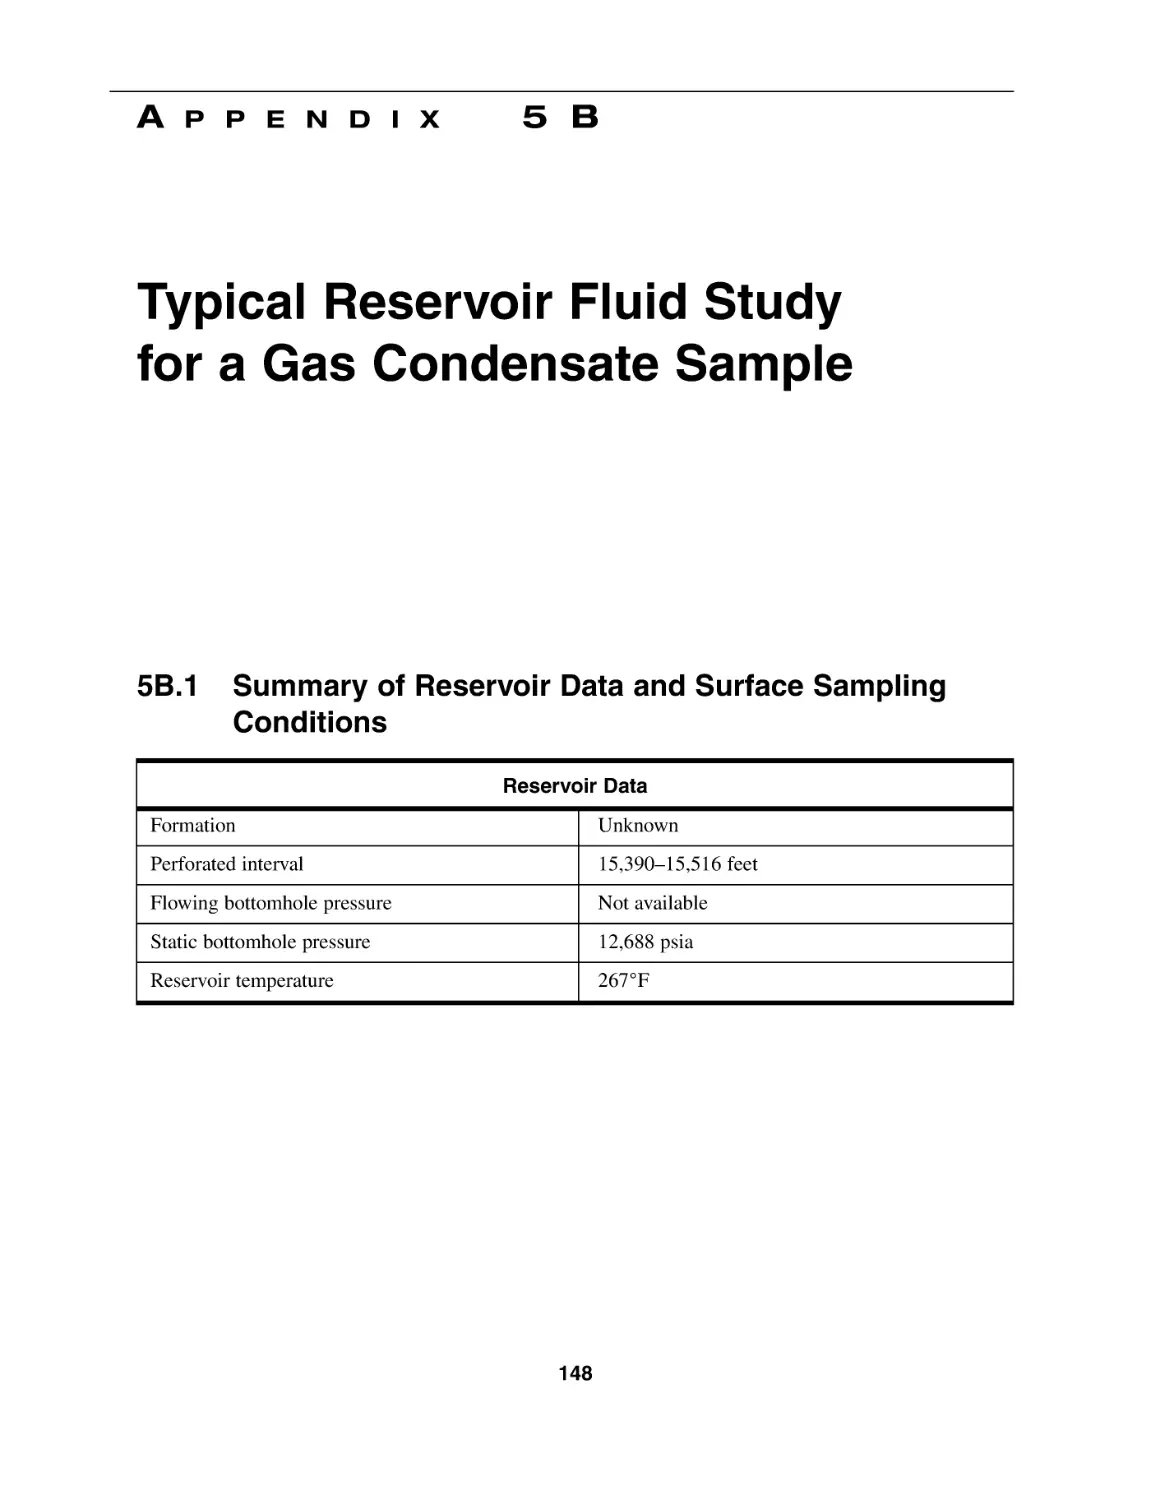 Appendix 5B
5B.1 Summary of Reservoir Data and Surface Sampling Conditions